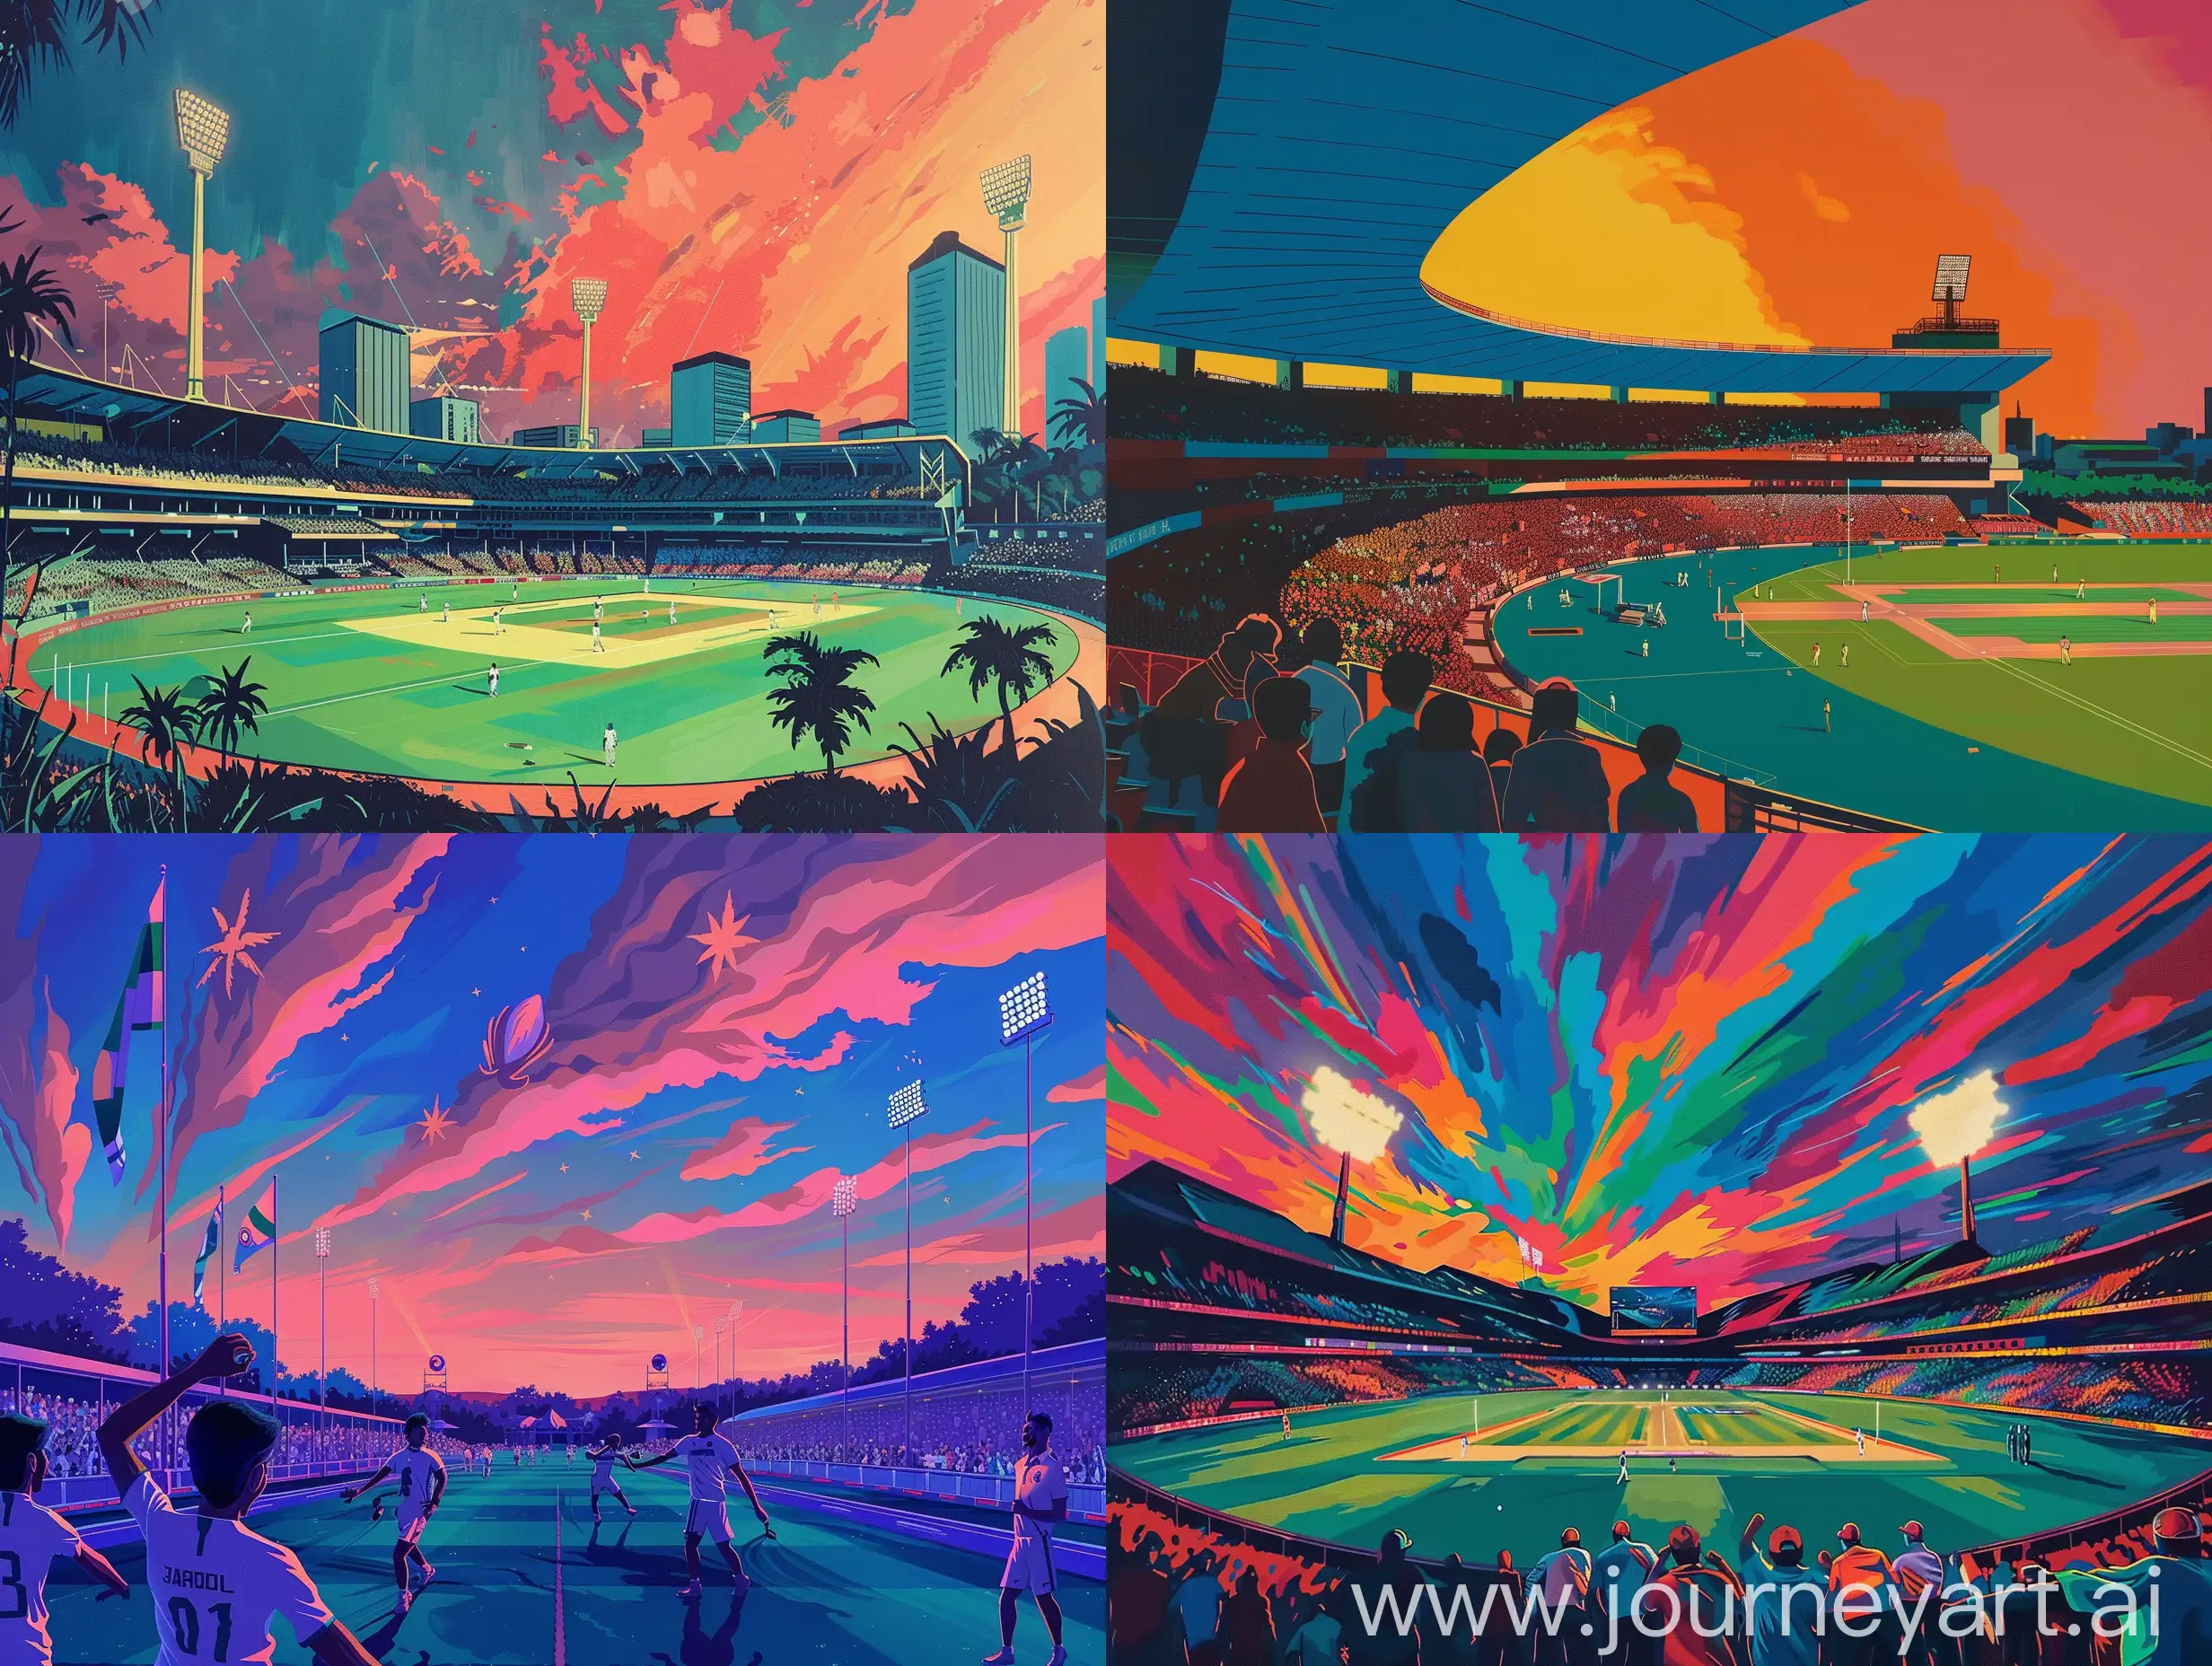 Team india winning the t20 world cup in evening, hiroshi nagai aesthetic, breathtaking surreal visualization